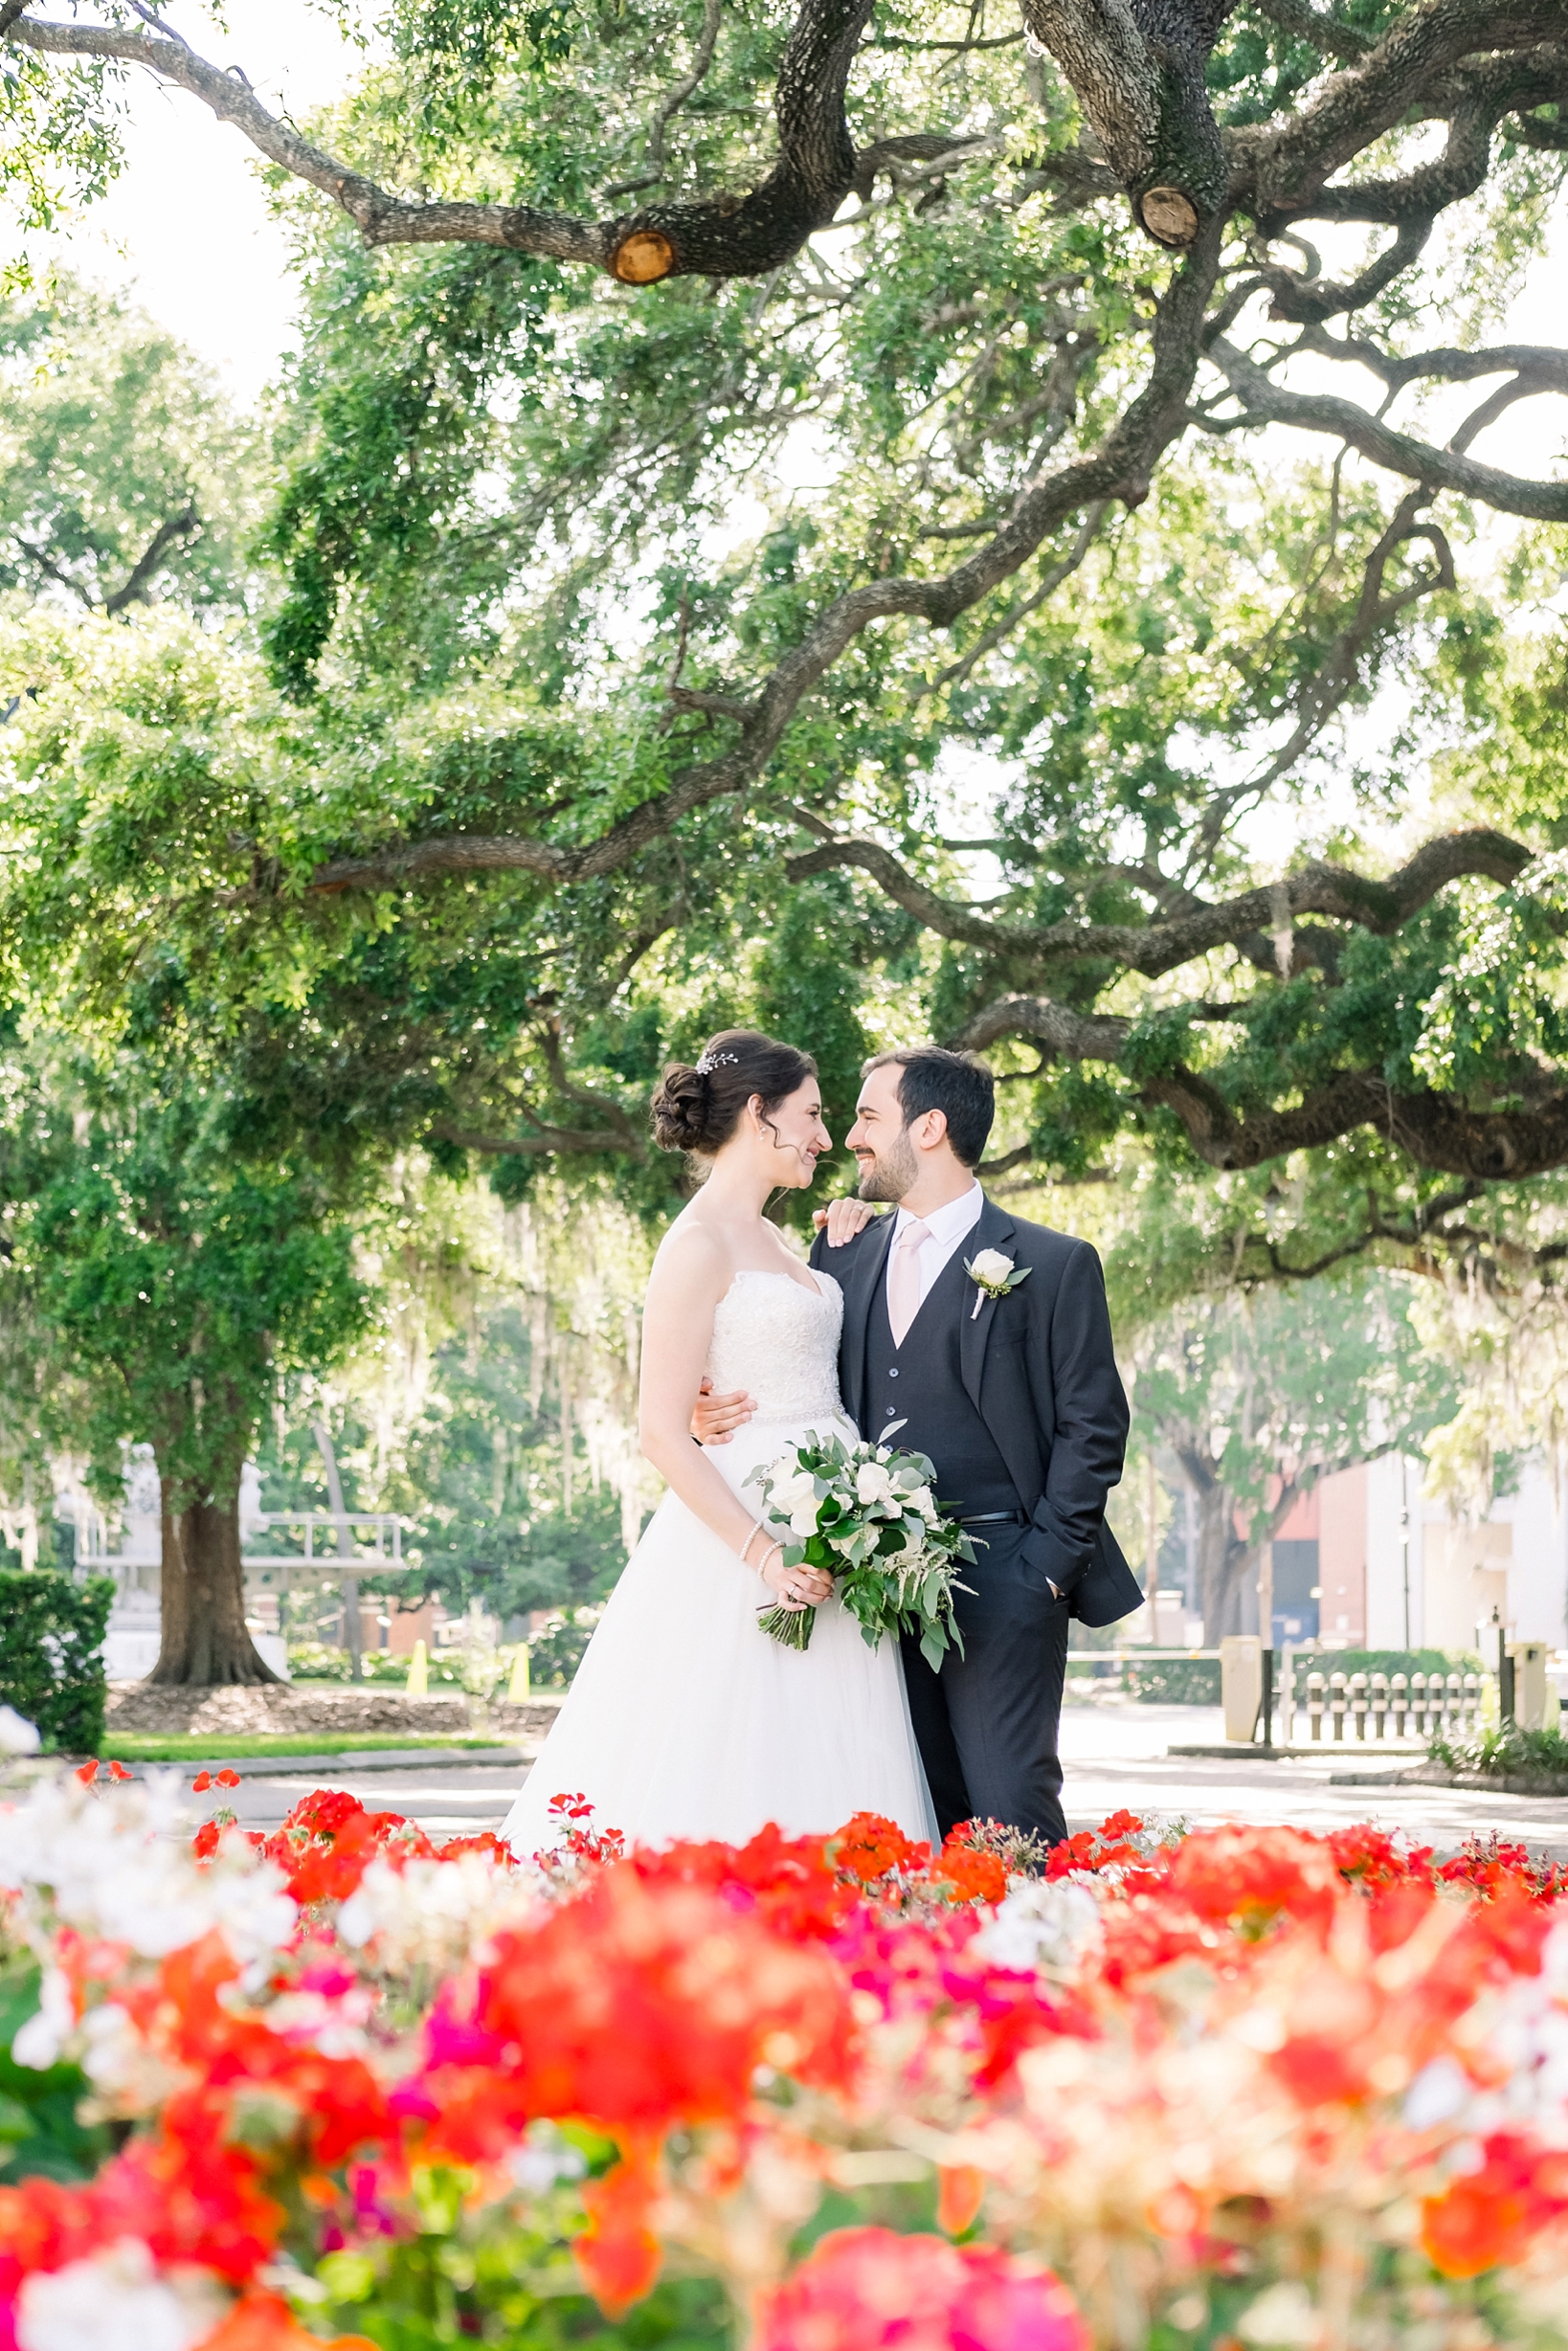 Bride and Groom under an oak tree above a bright orange flower bed in full bloom